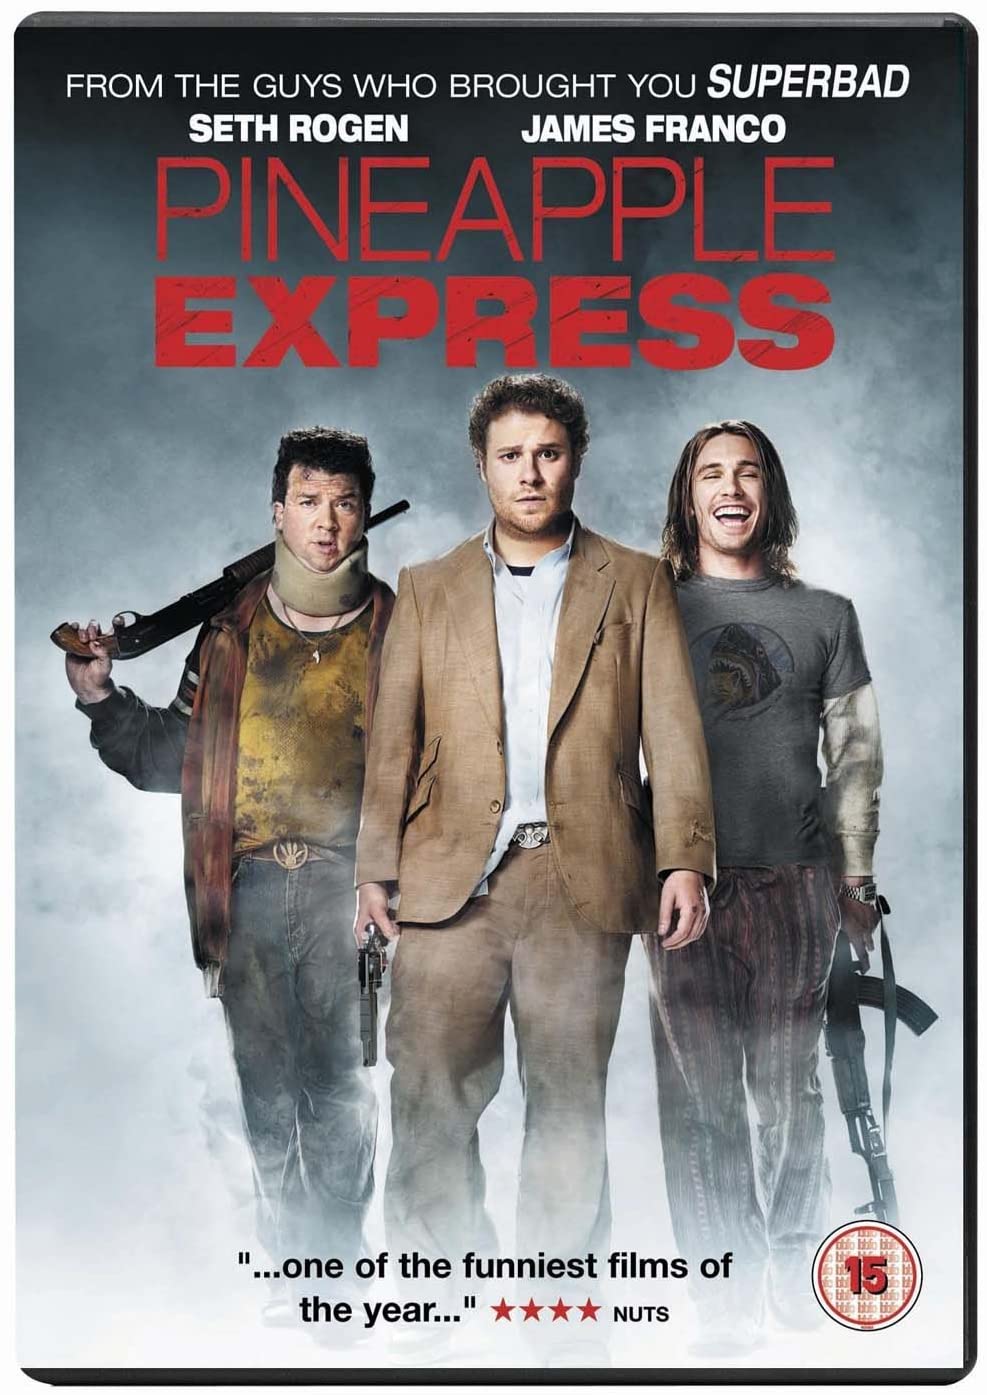 Pineapple Express [2008] [2009] - Comedy/Action [DVD]